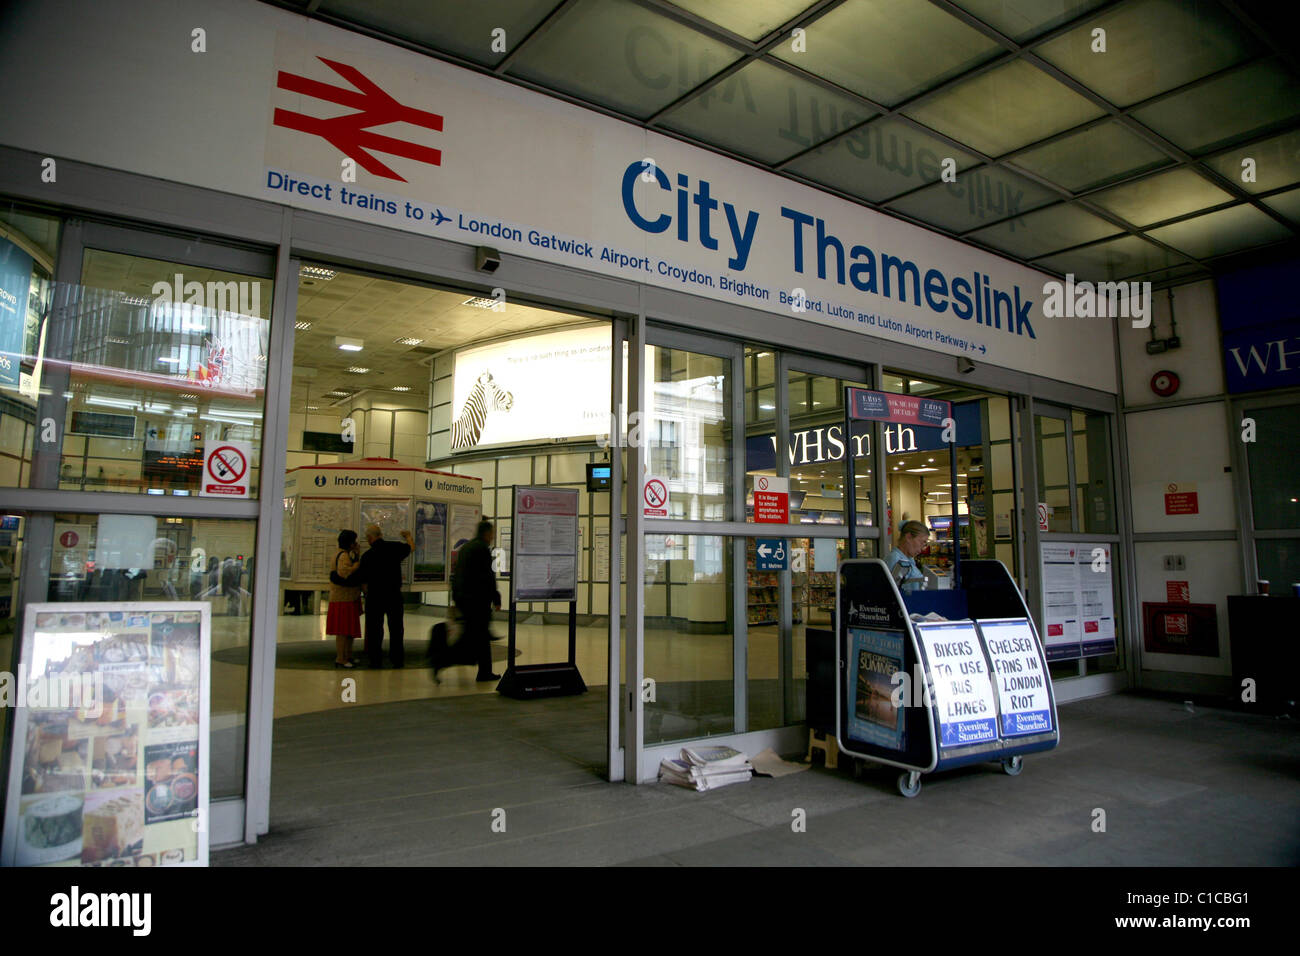 General View gv of City Thameslink Railway station in London, England. Stock Photo